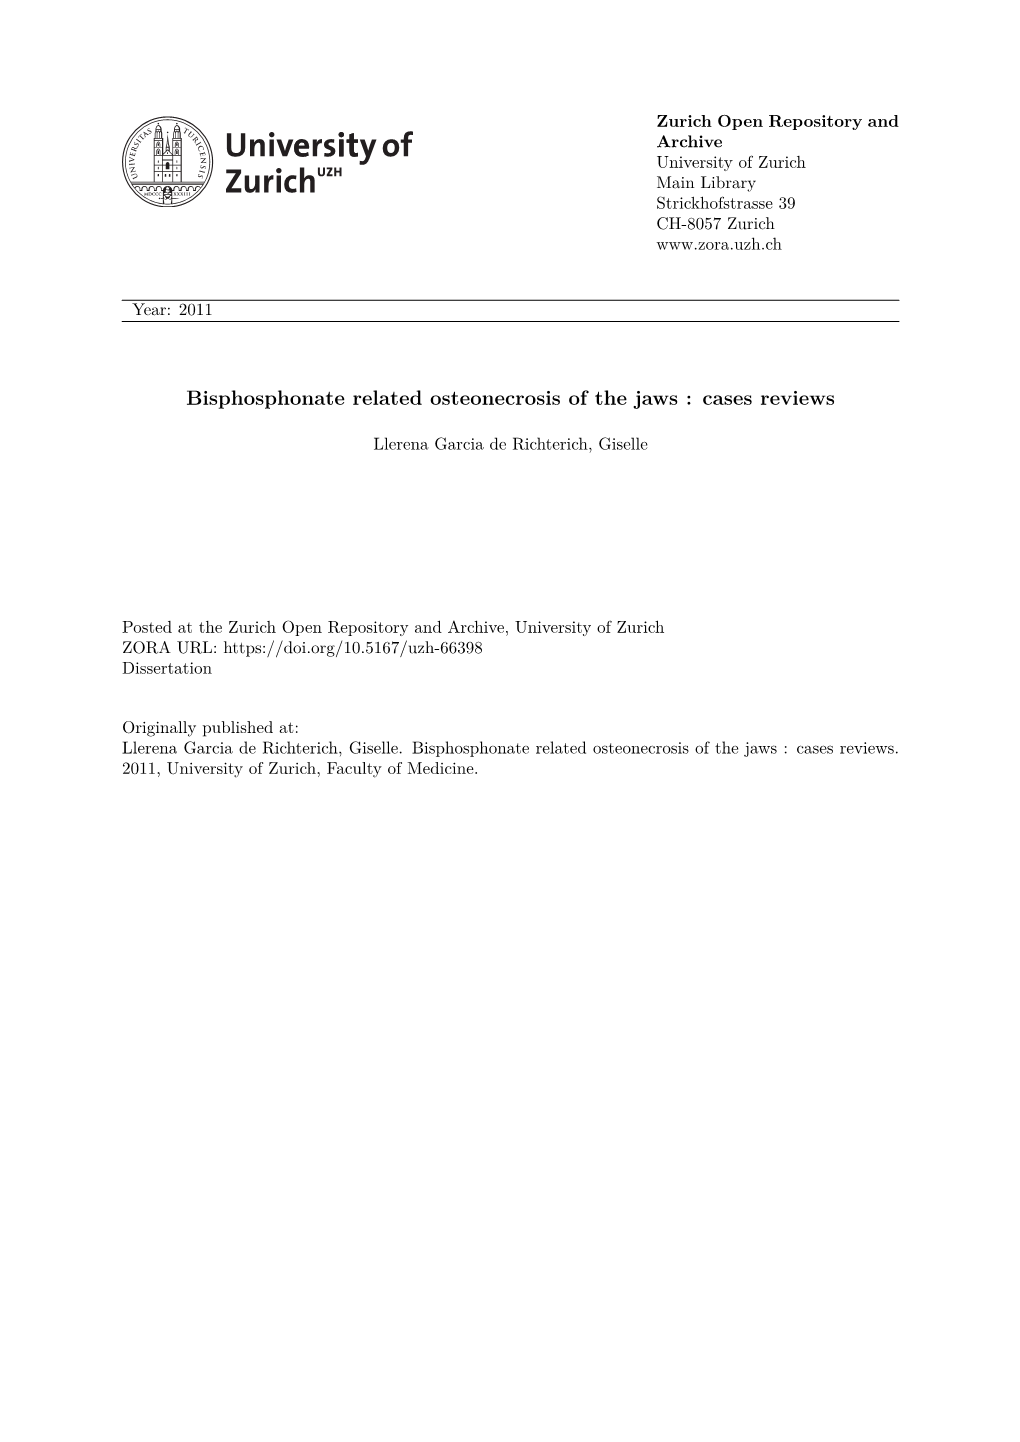 'Bisphosphonate Related Osteonecrosis of the Jaws : Cases